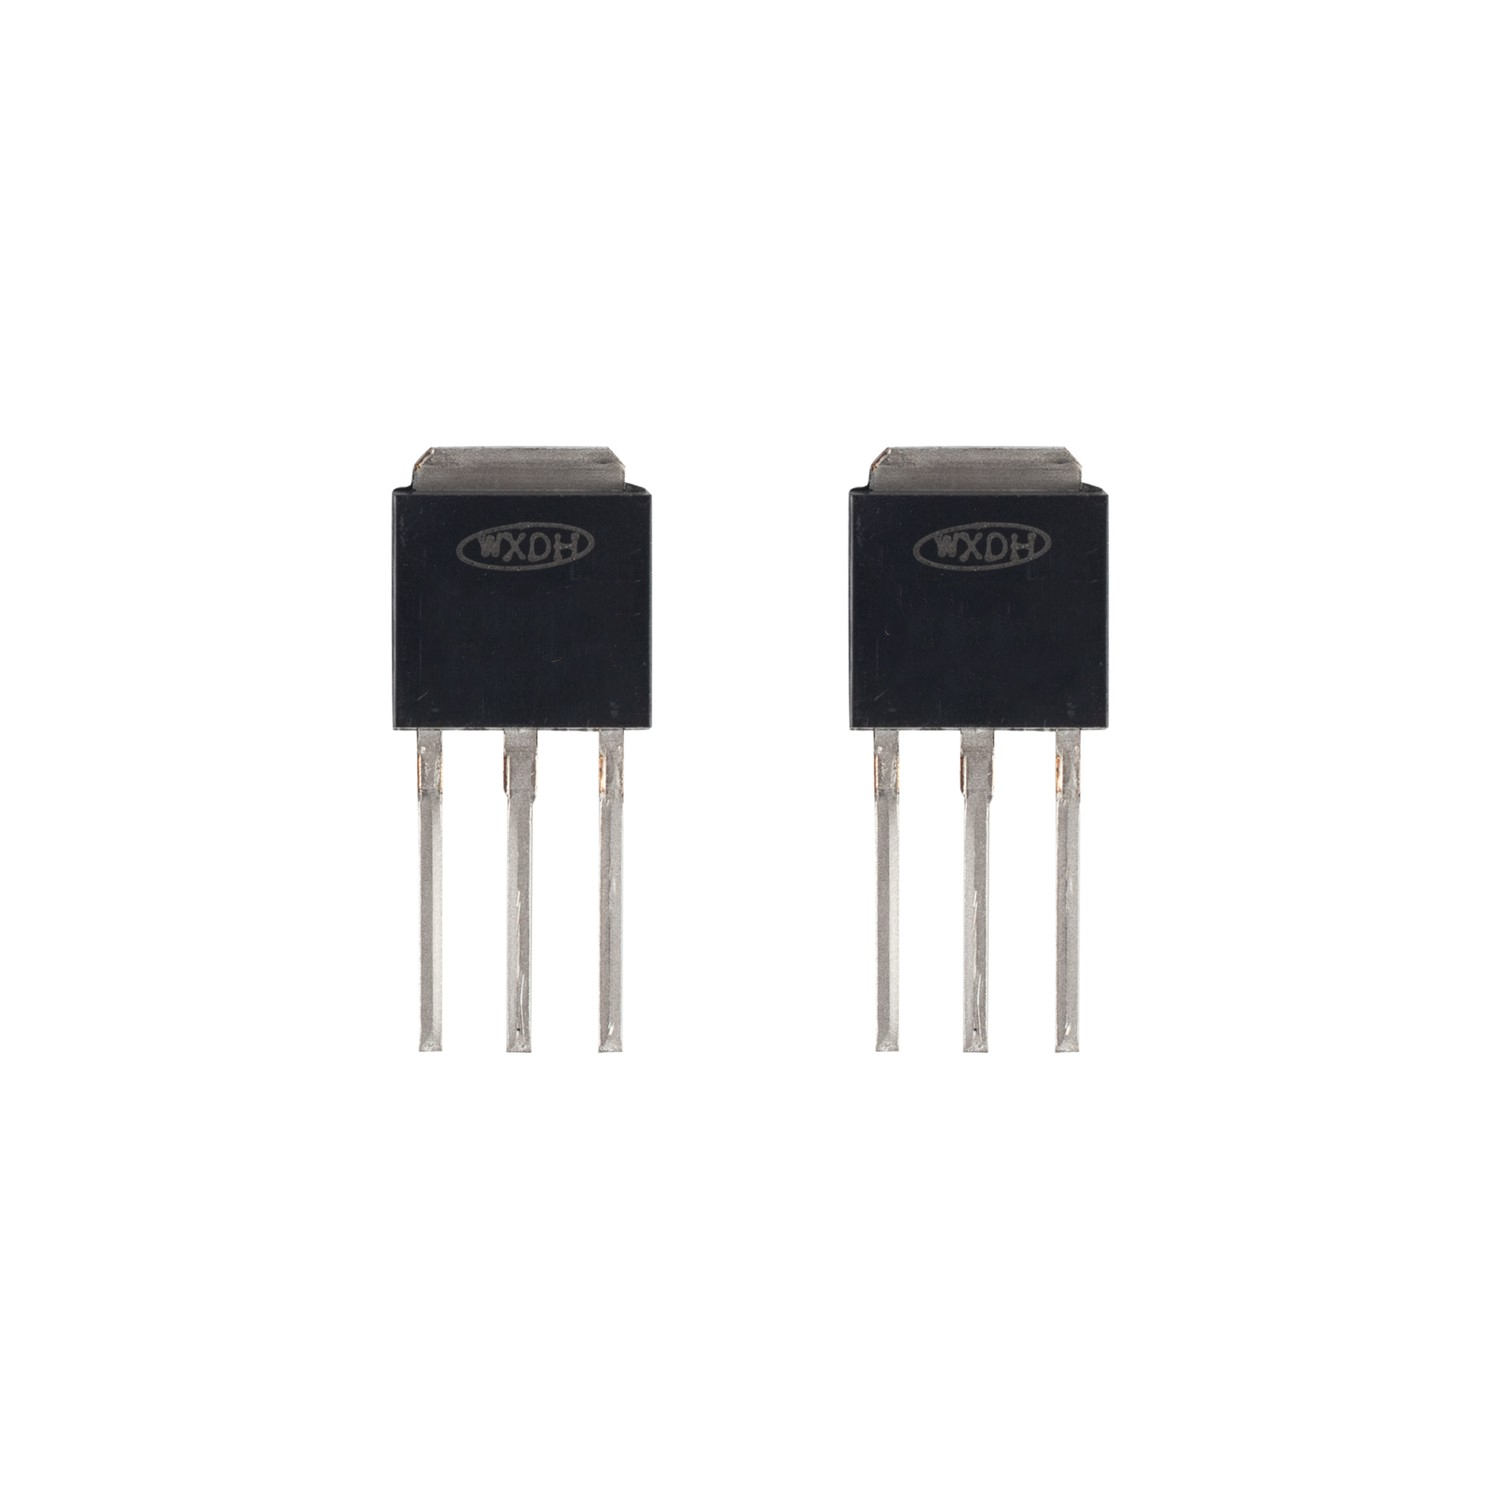 N-channel Enhancement Mode Power MOSFET 3A 900V 